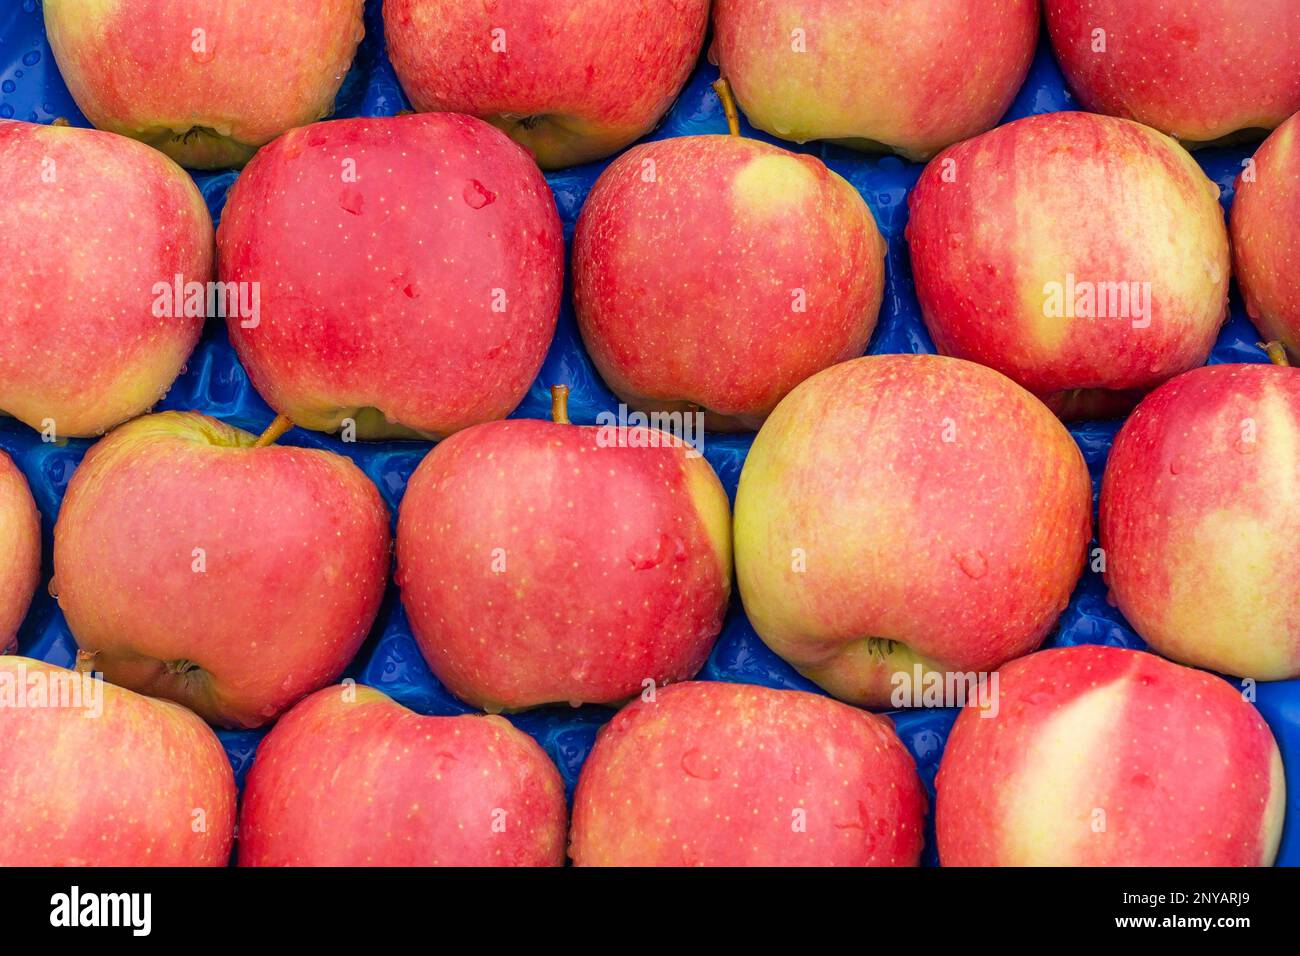 Fresh red apples on the market container. Healthy organic agricultural produce. Nutritious fruits. Stock Photo